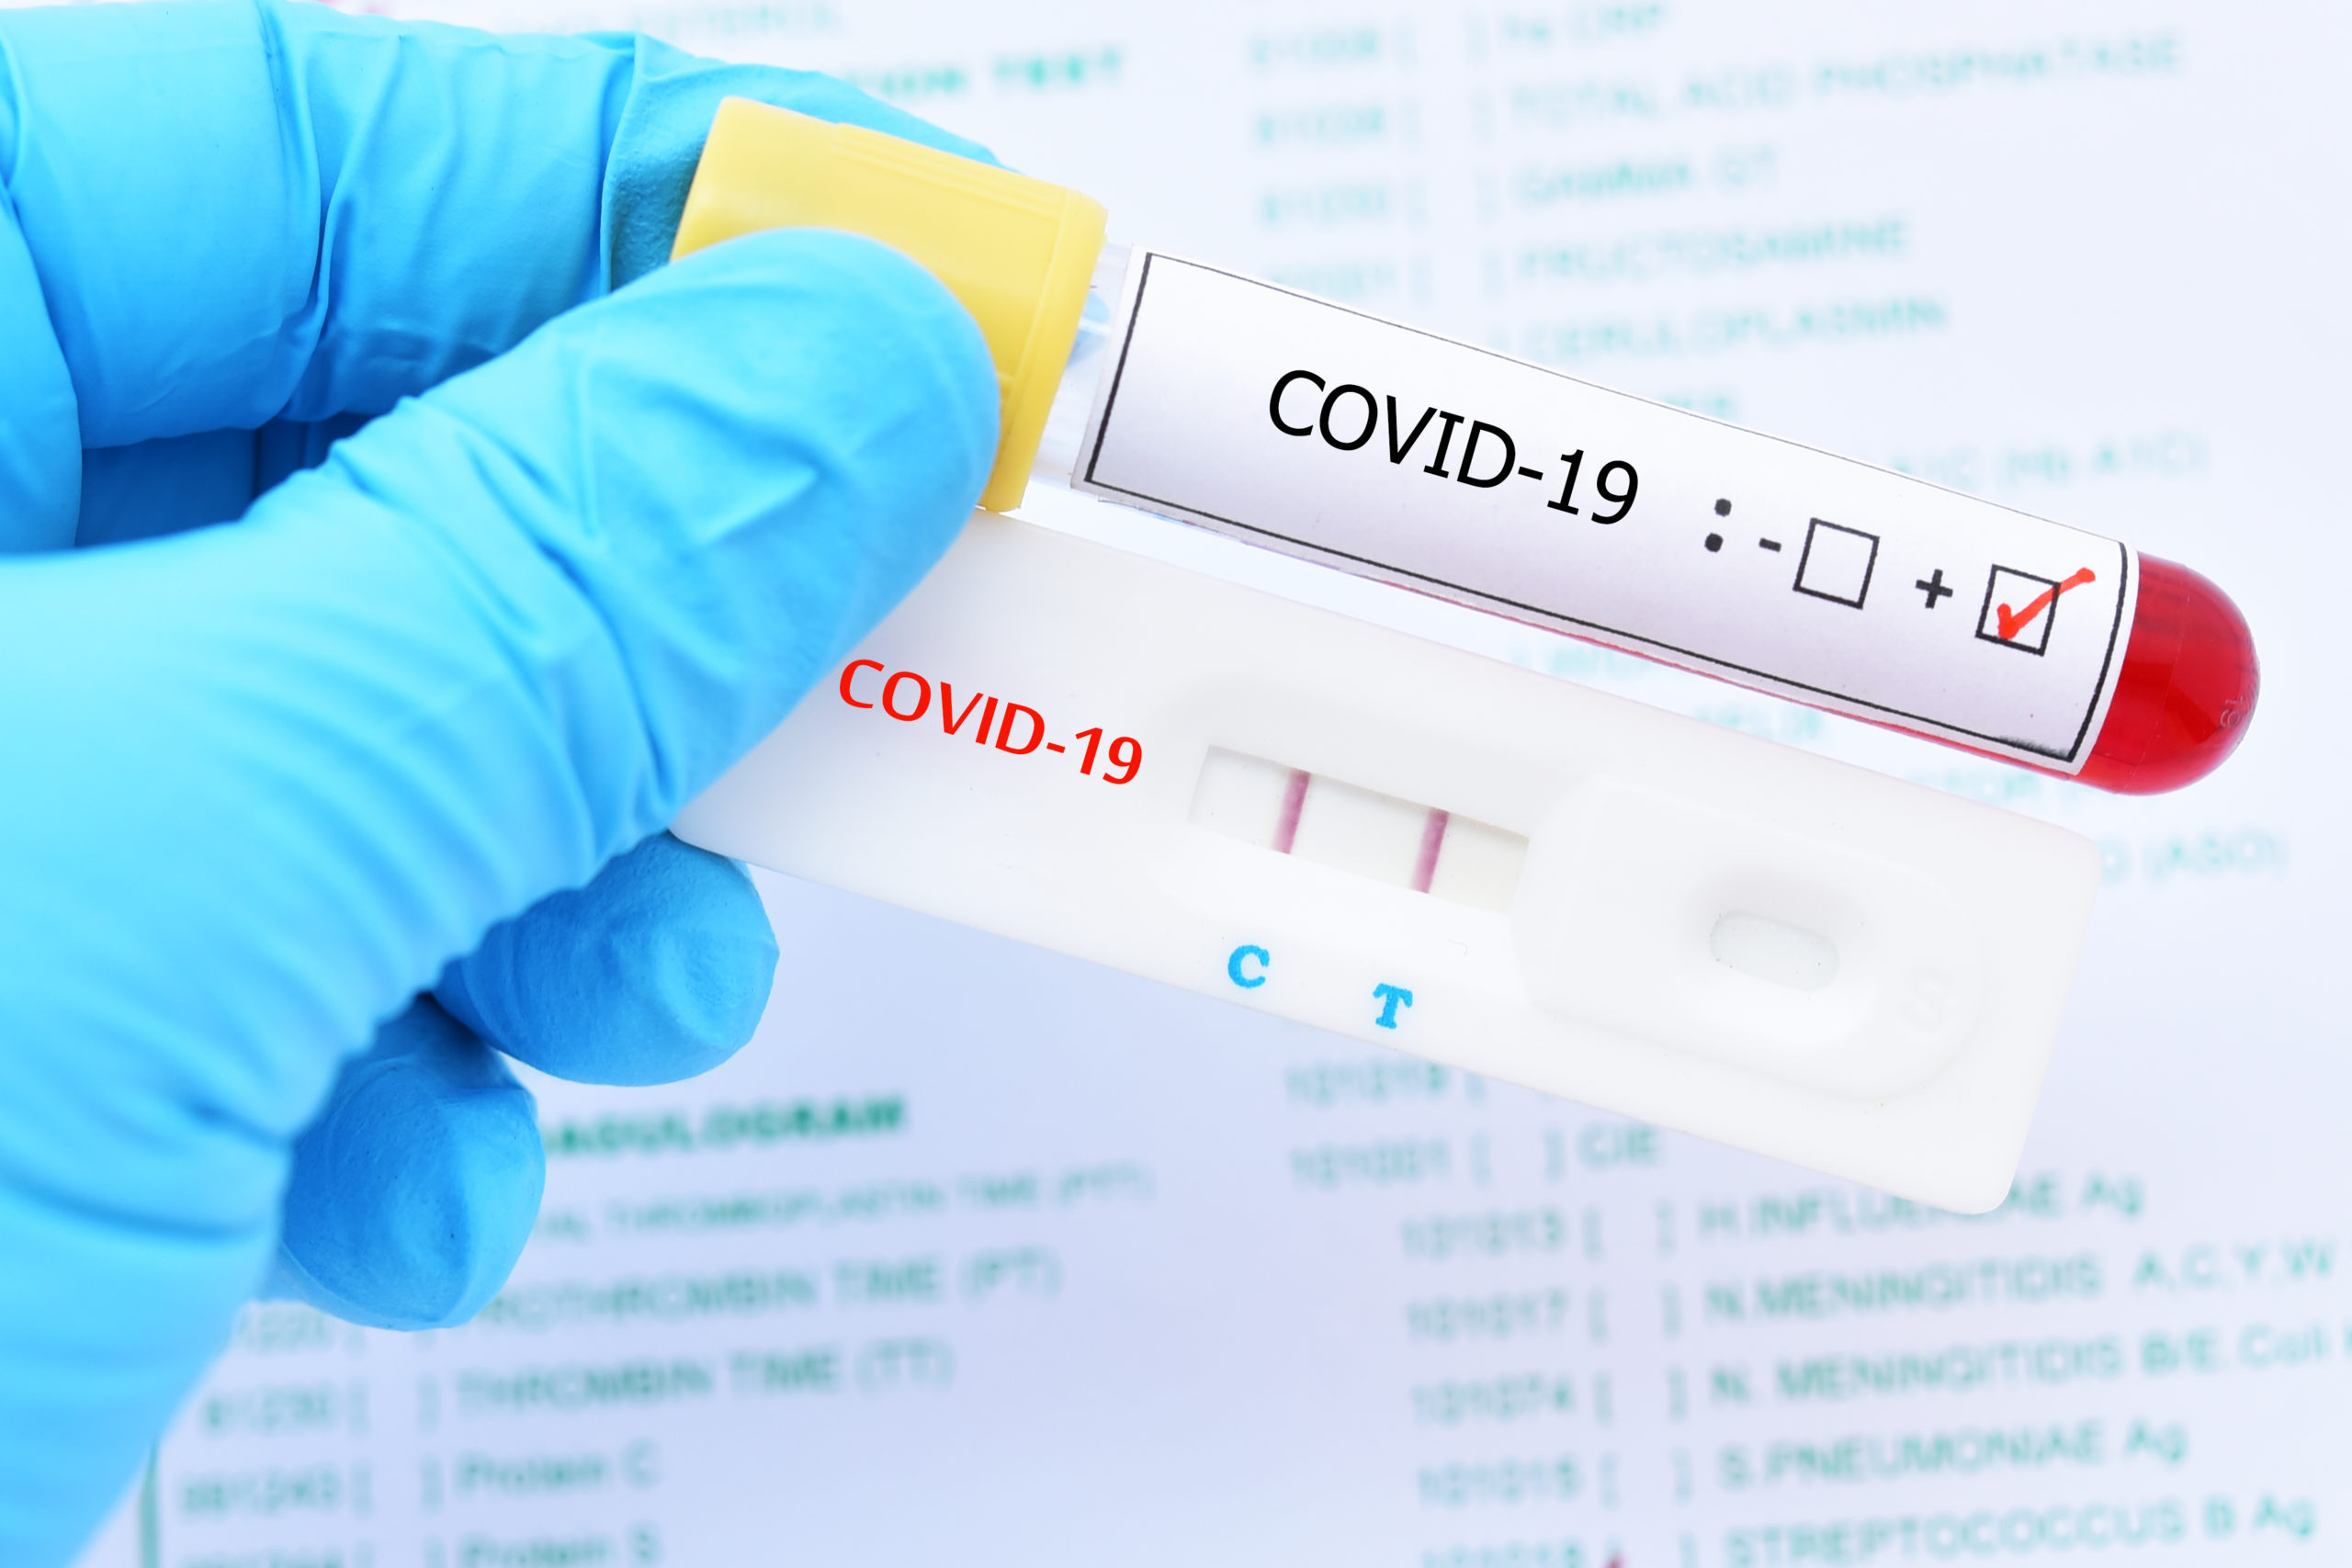 Rapid antigen test; the perfect way to stop COVID-19 from spreading